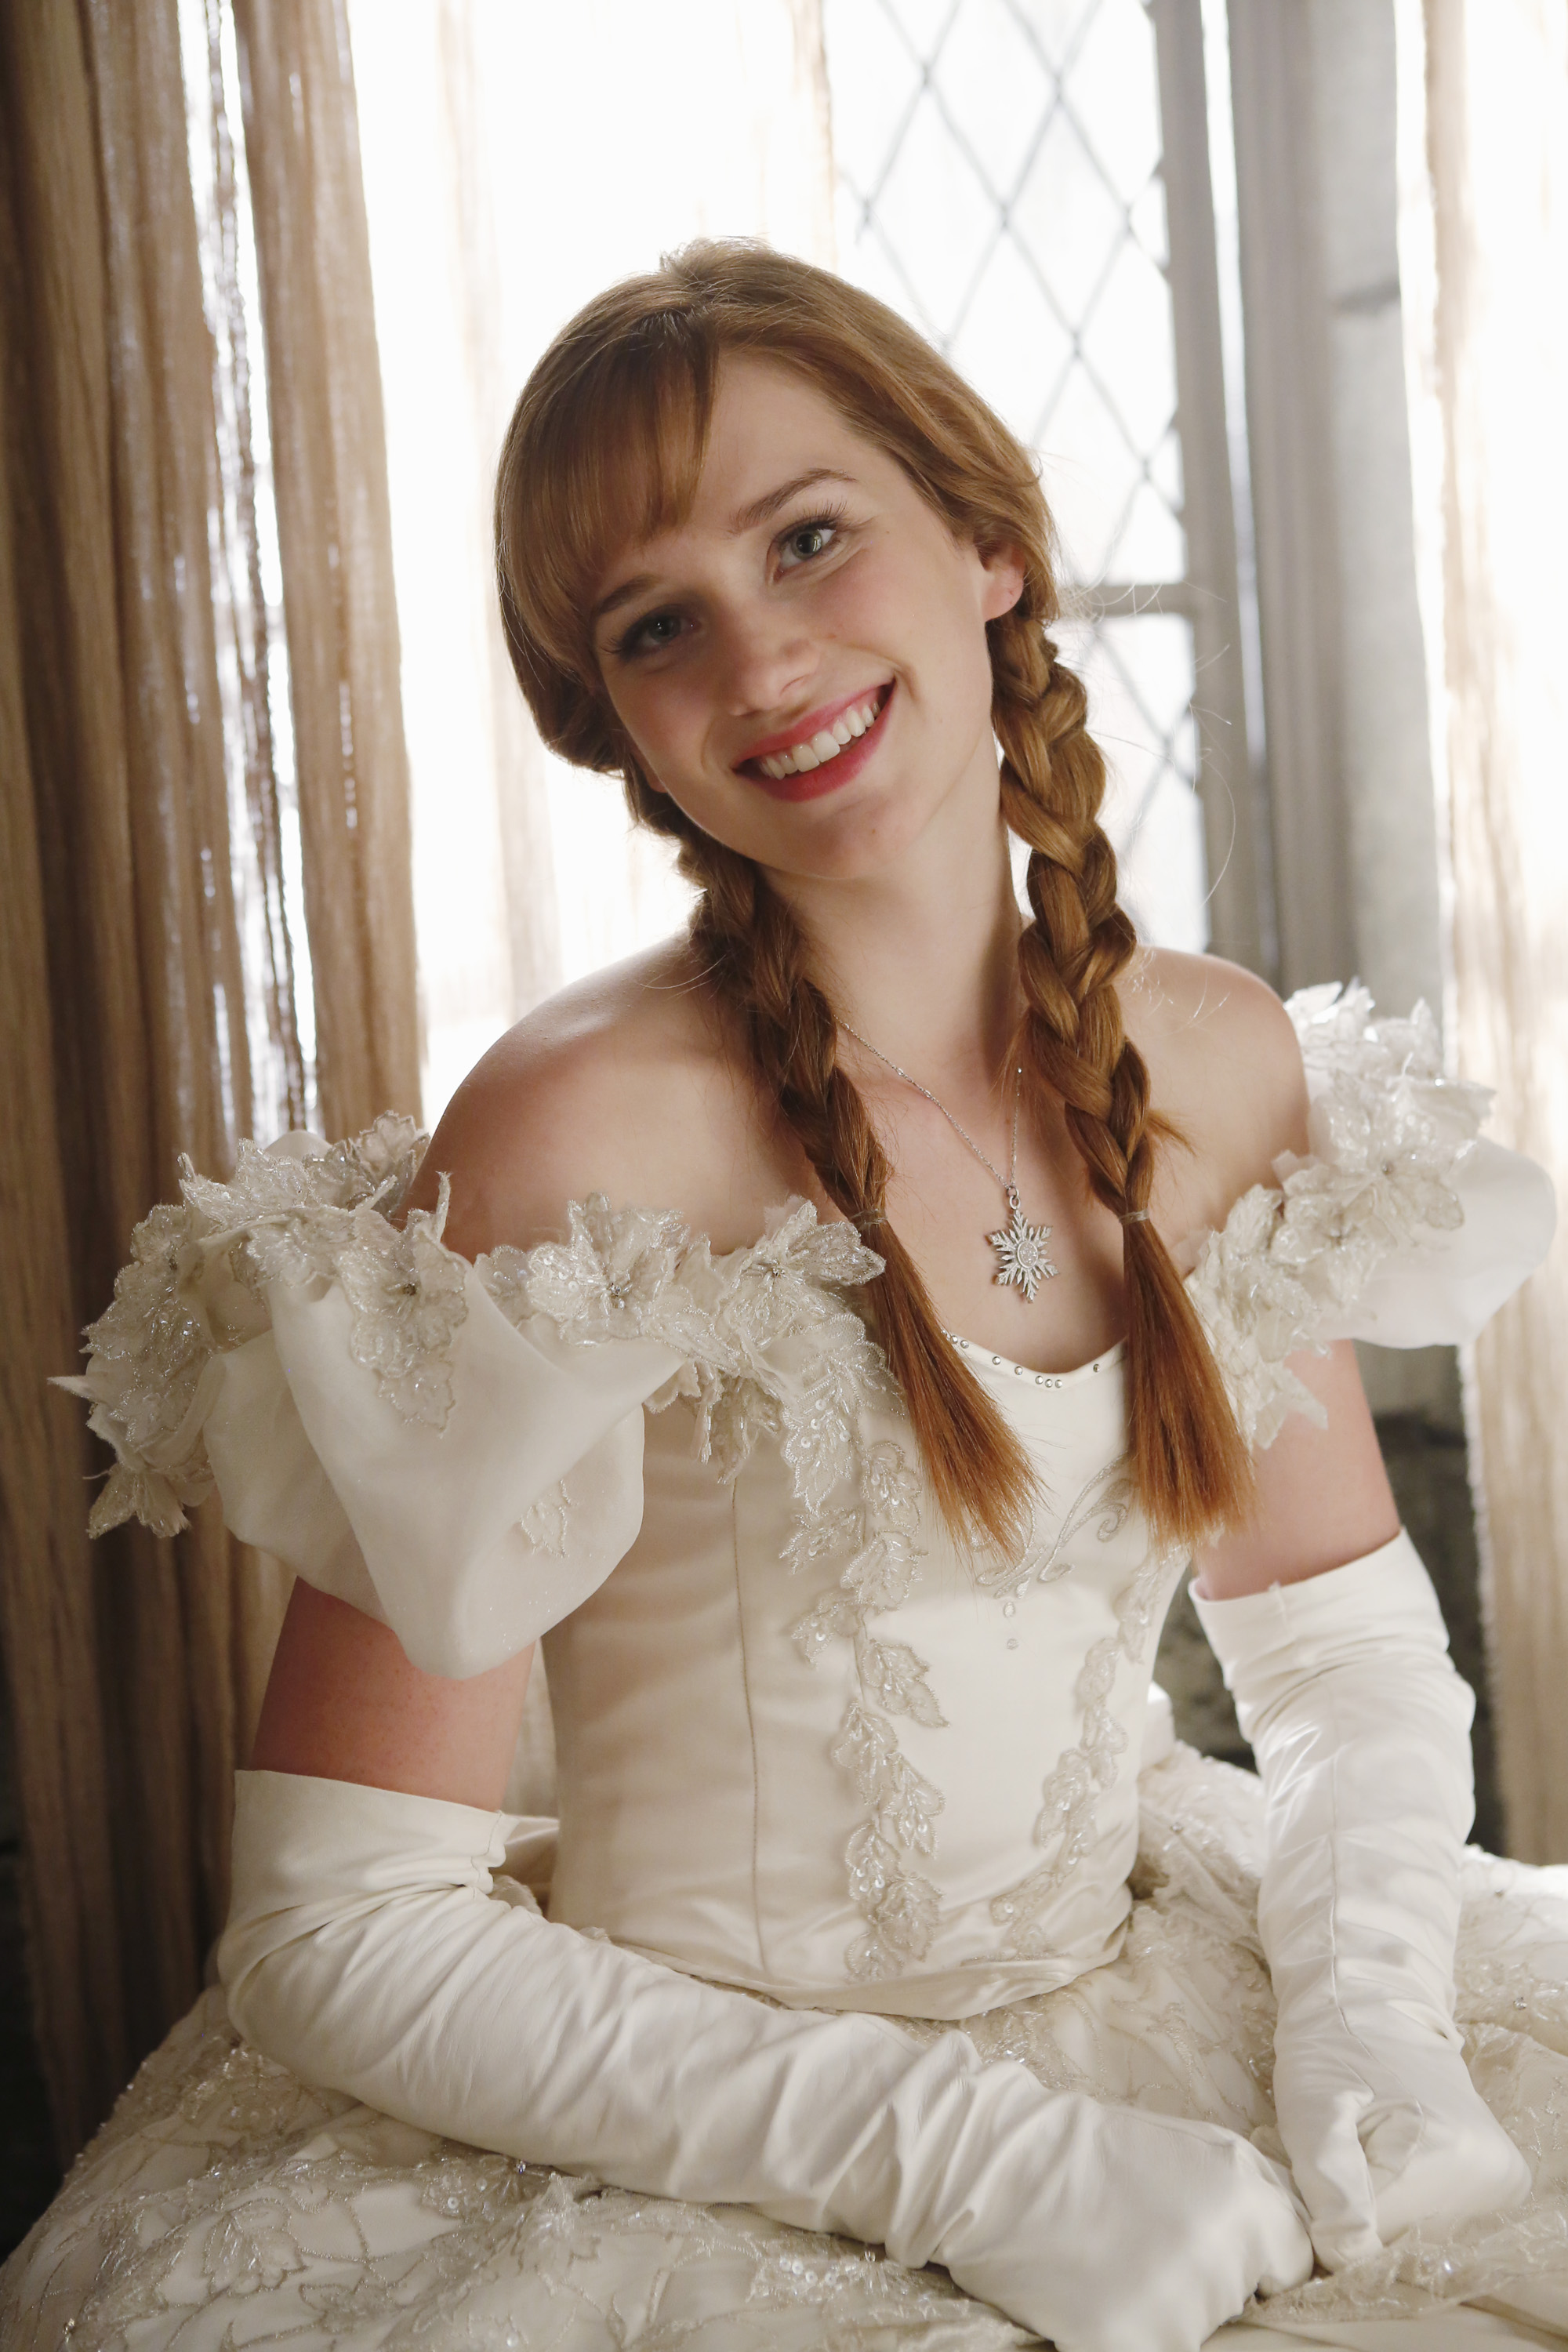 Women Actress Elizabeth Lail Once Upon A Time Braids Smiling White Dress Dress Red Lipstick Teeth Re 2000x3000